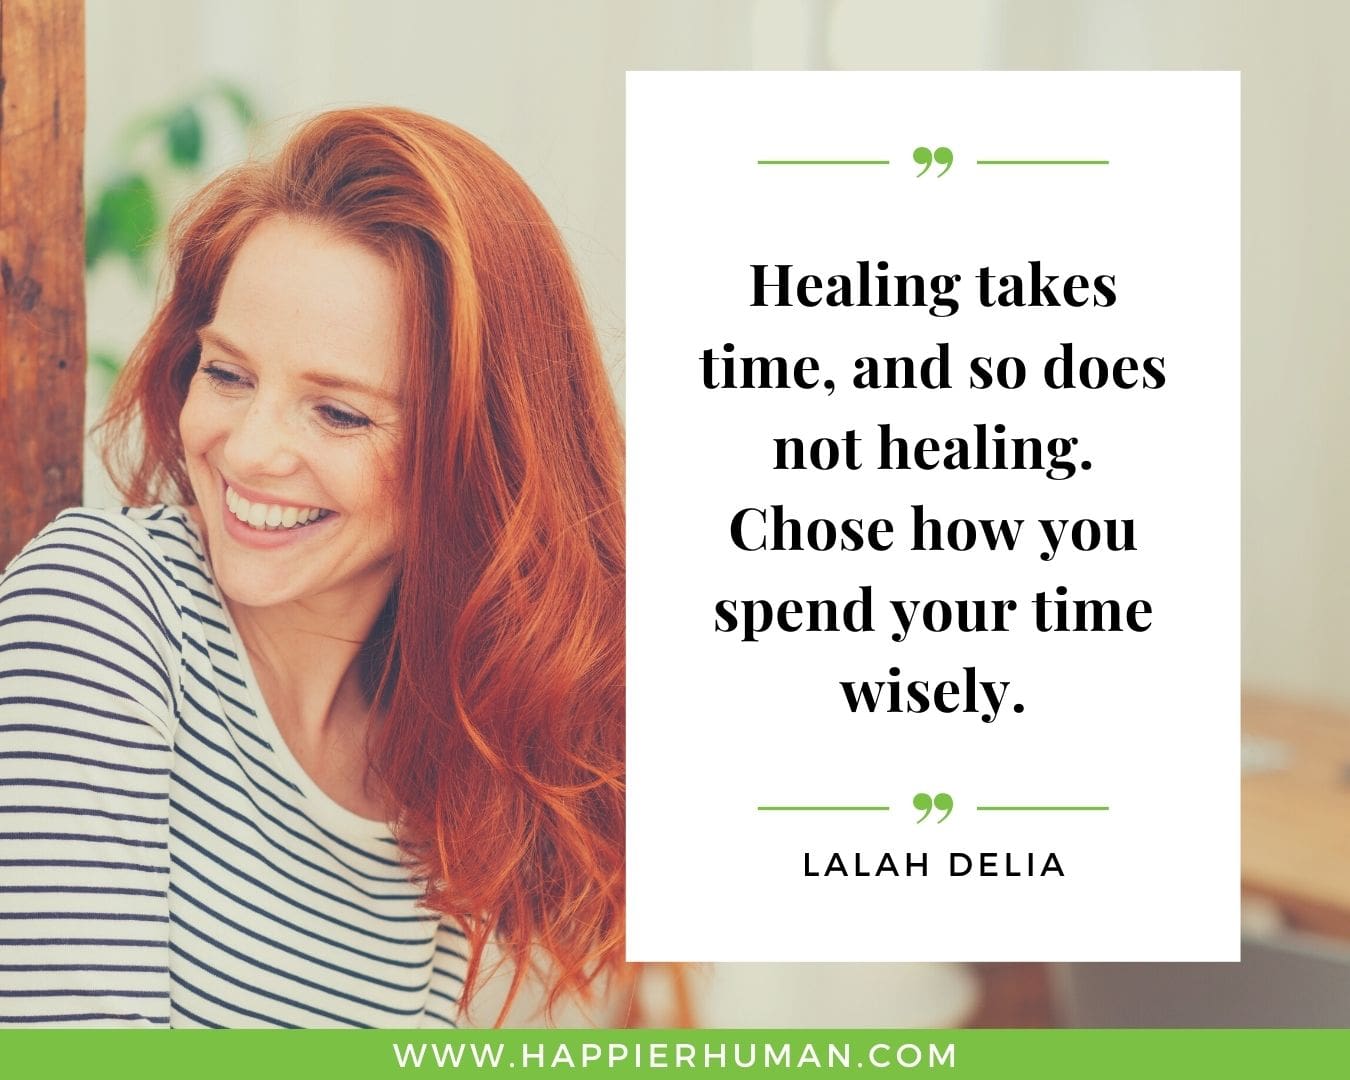 Positive Energy Quotes - “Healing takes time, and so does not healing. Chose how you spend your time wisely.” - Lalah Delia